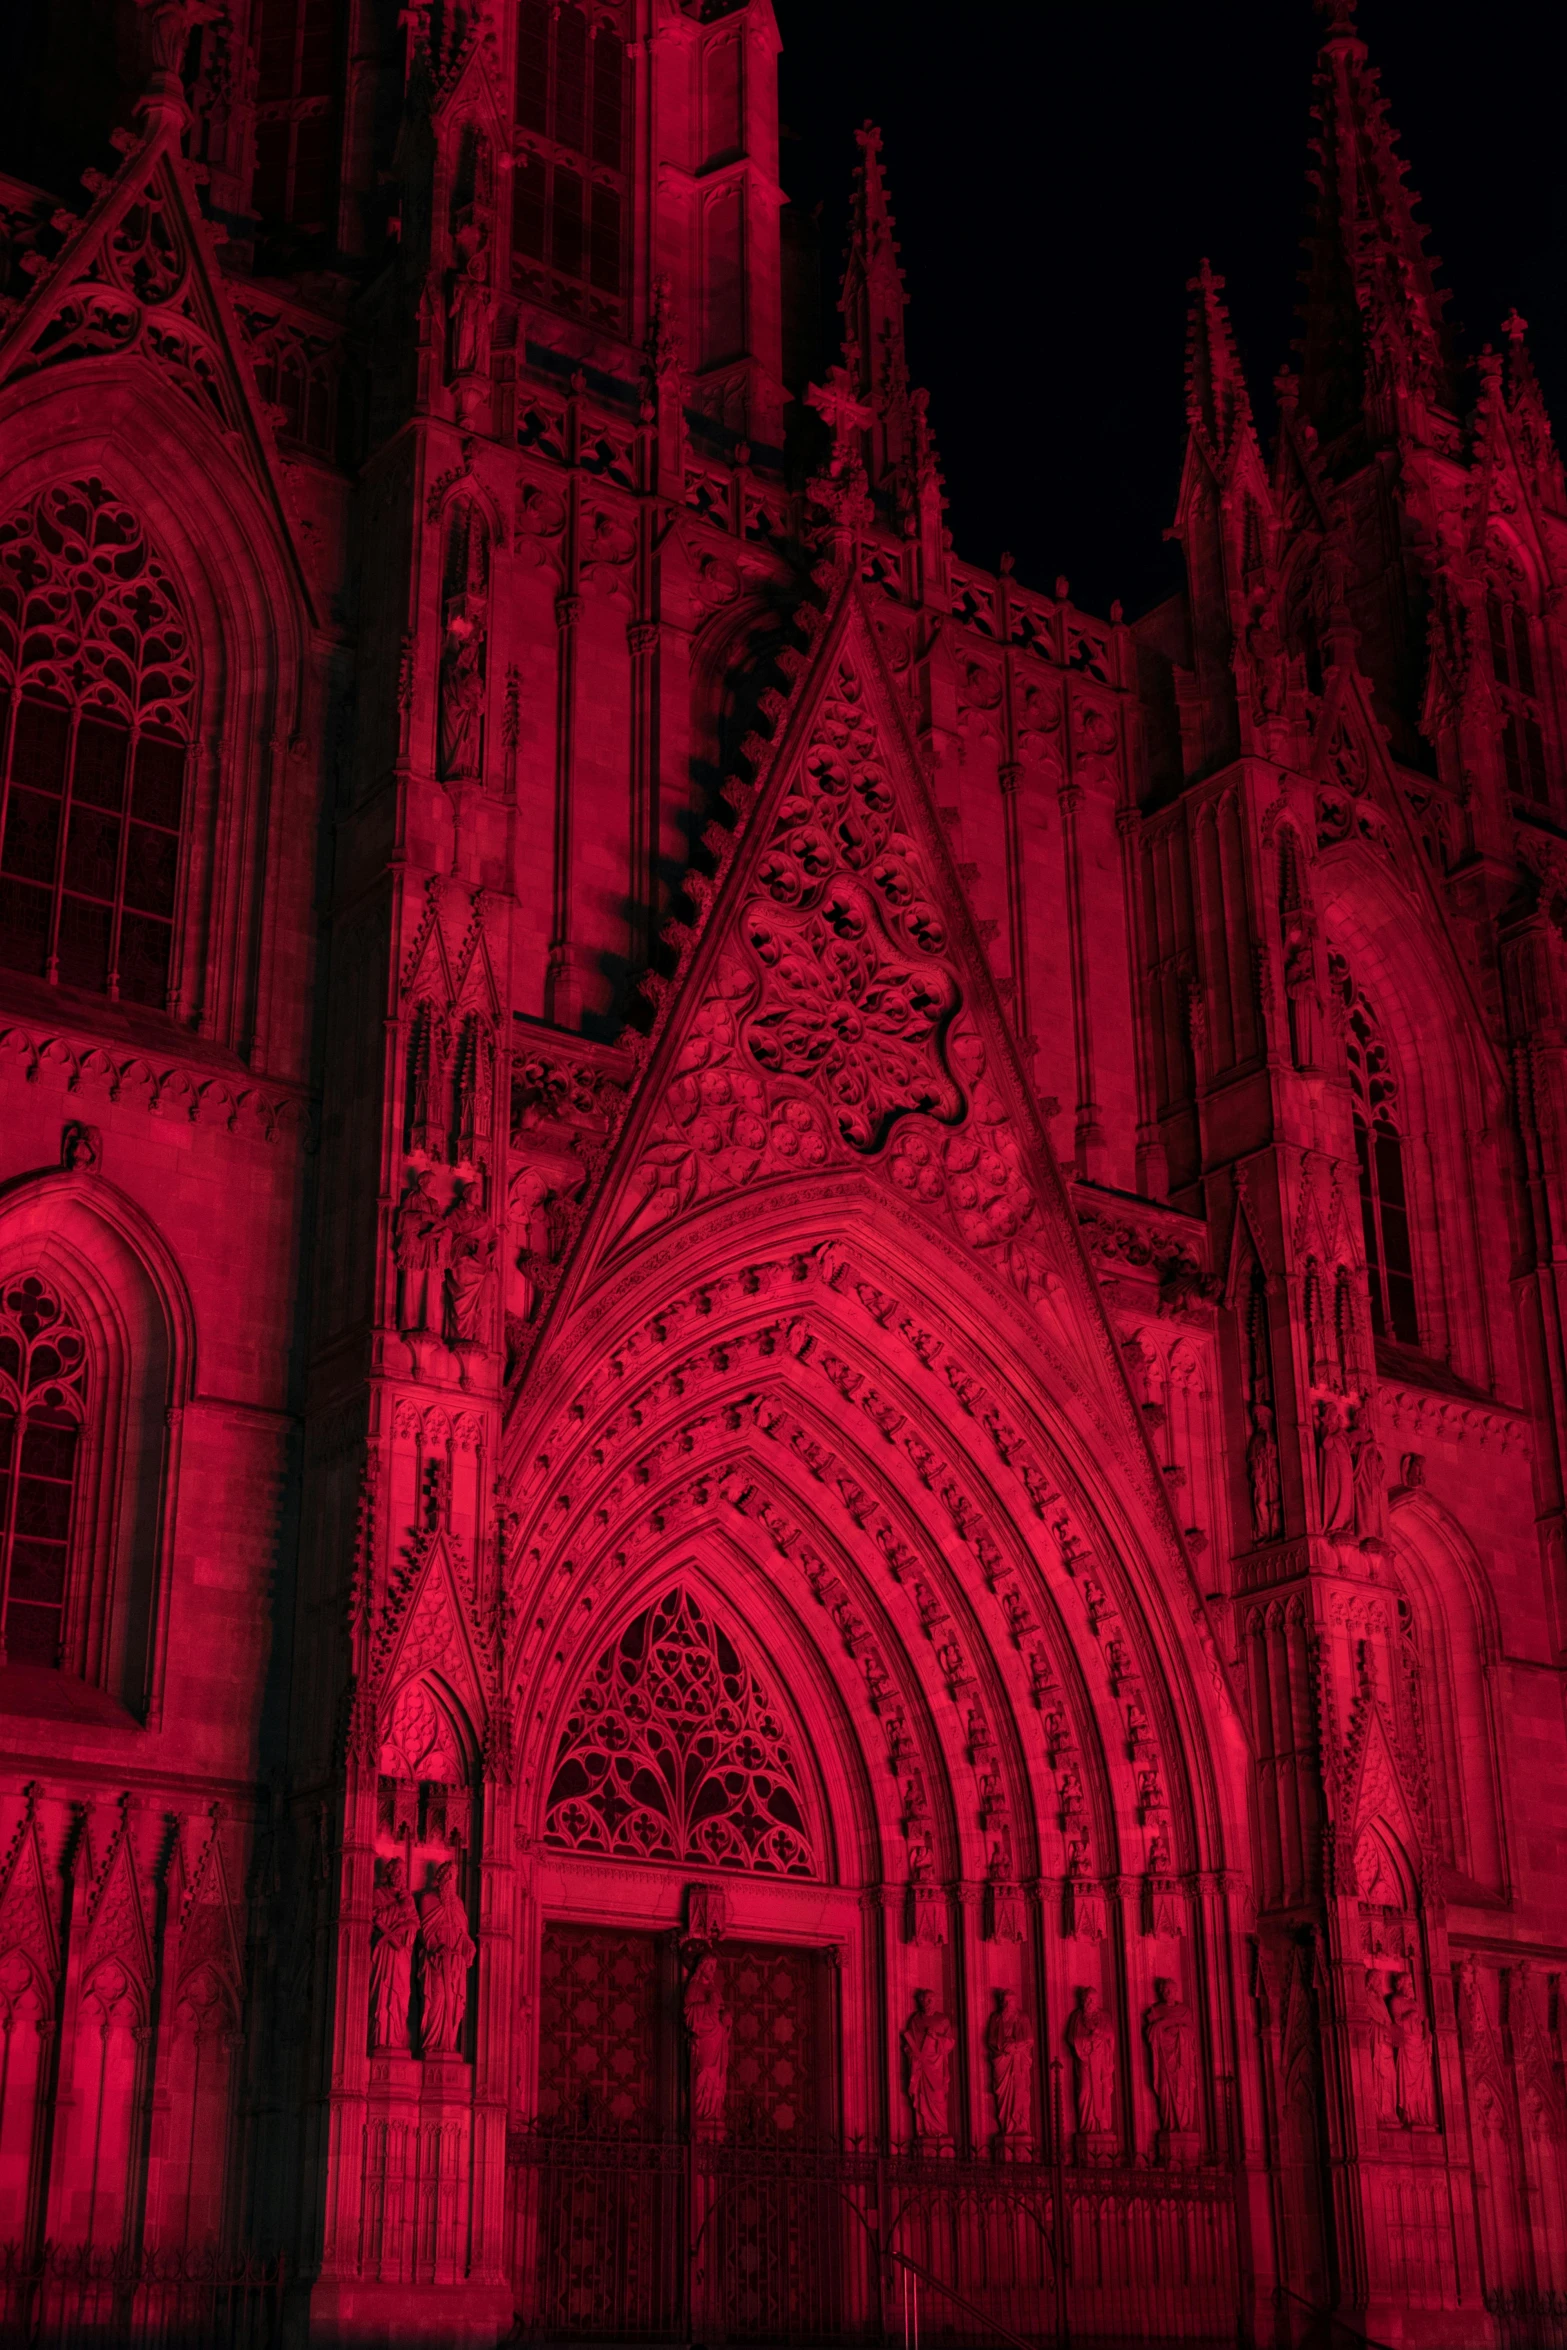 a large cathedral lit up with red lights, gothic art, rose pink lighting, spooky lighting, shades of aerochrome gold, red accents